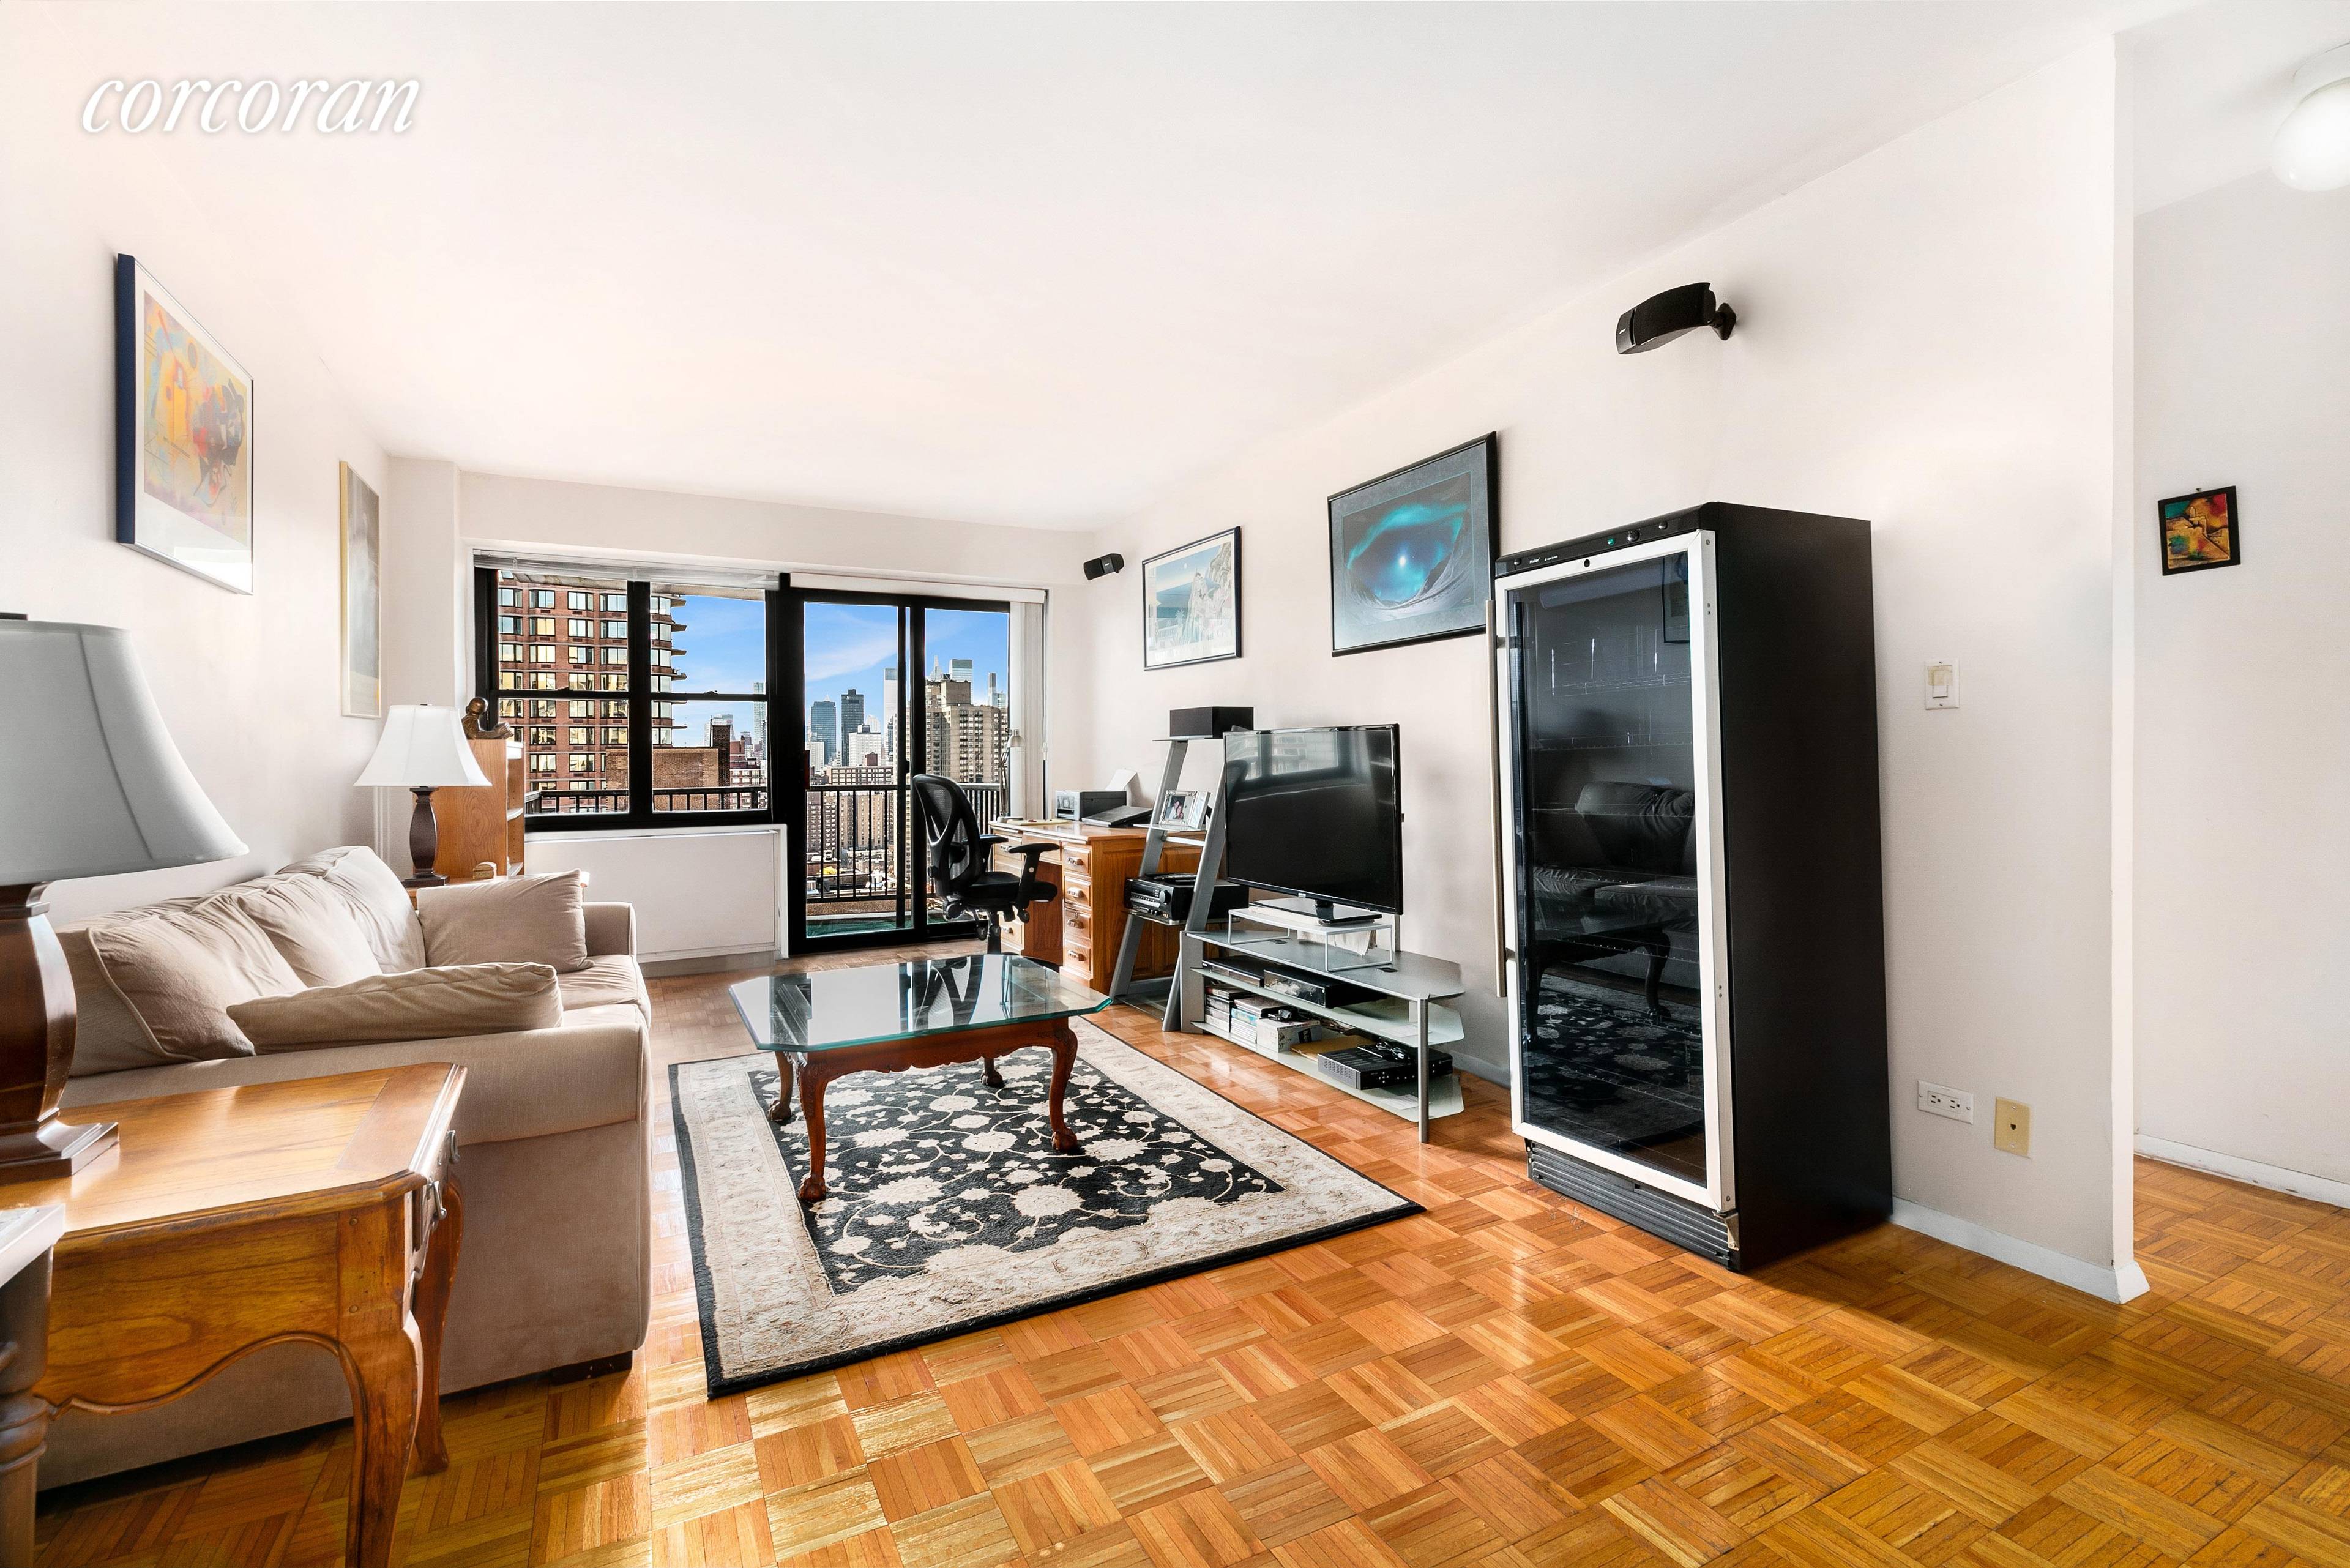 Welcome to 345 East 80th Street 25J, a graciously proportioned corner 1 bedroom and 1 bathroom condominium apartment.